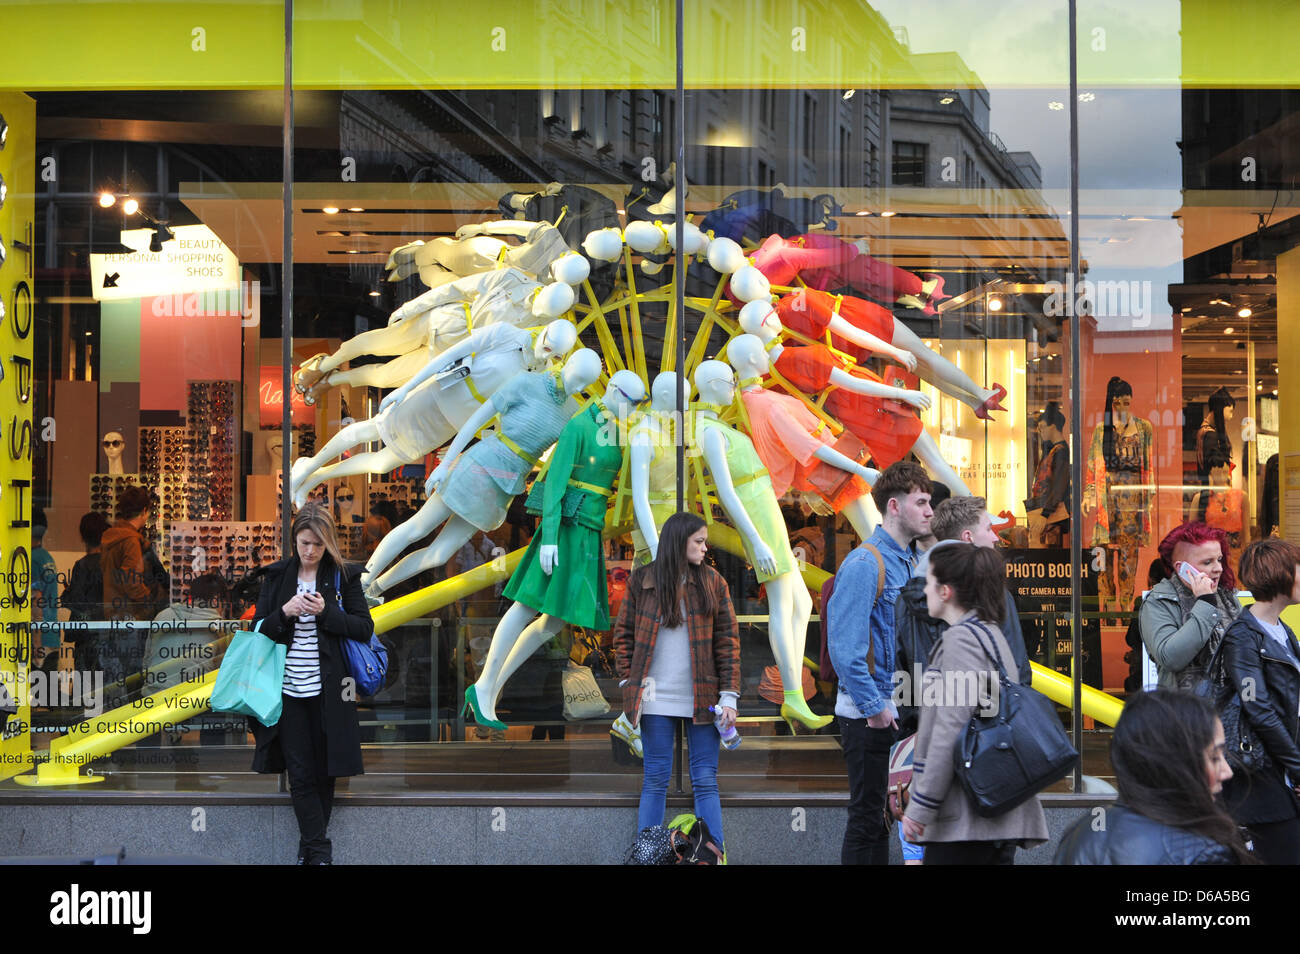 Brewer Street, London, UK. 15th April 2013. The window of Topshop designed  by NEON. Regent Street Windows Project 2013, 